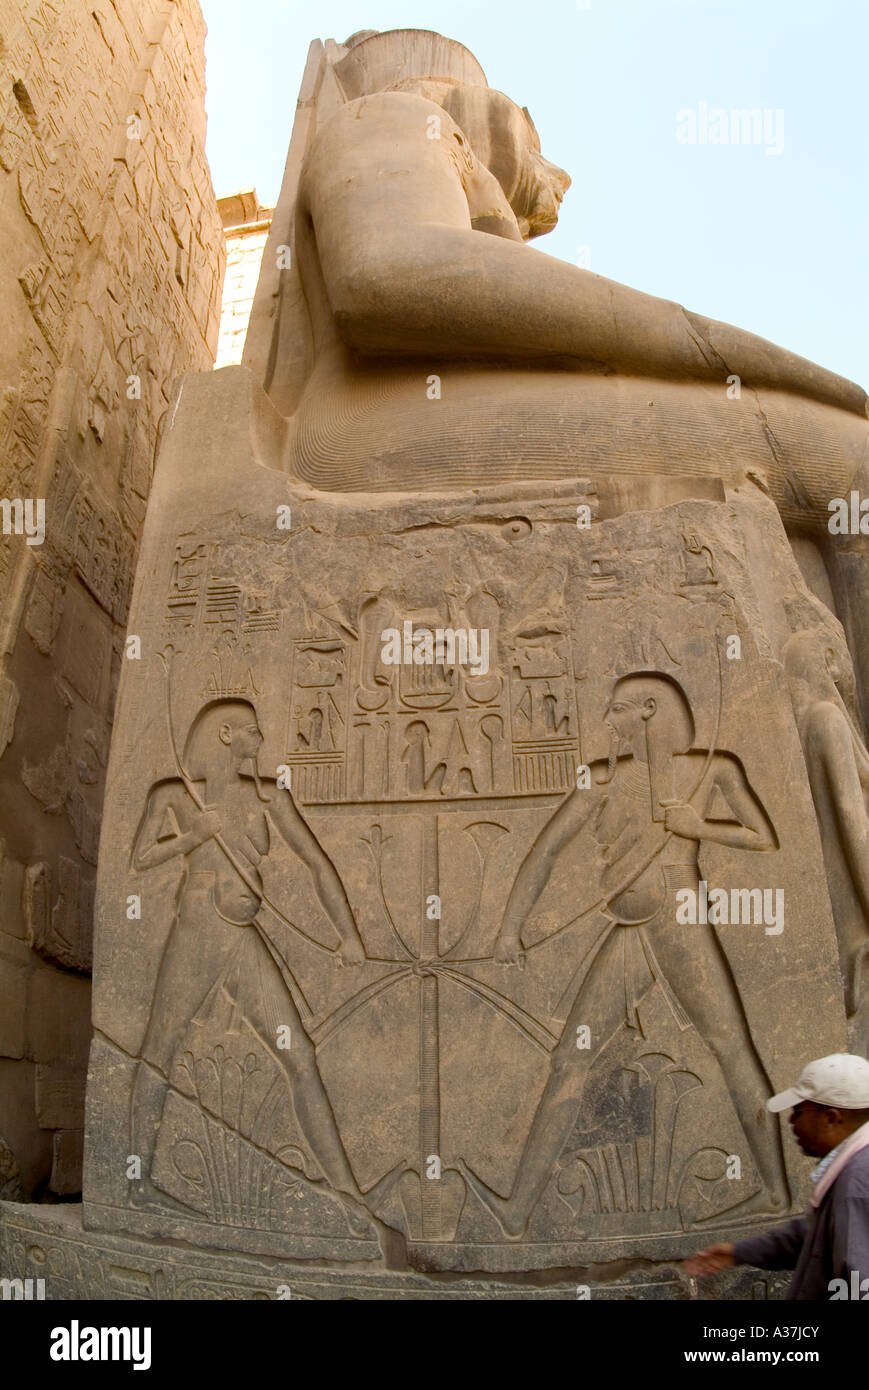 Luxor Temple Thebes Hieroglyphics Figures Colossal Statue Pharaoh Side View Entrance Pylon 